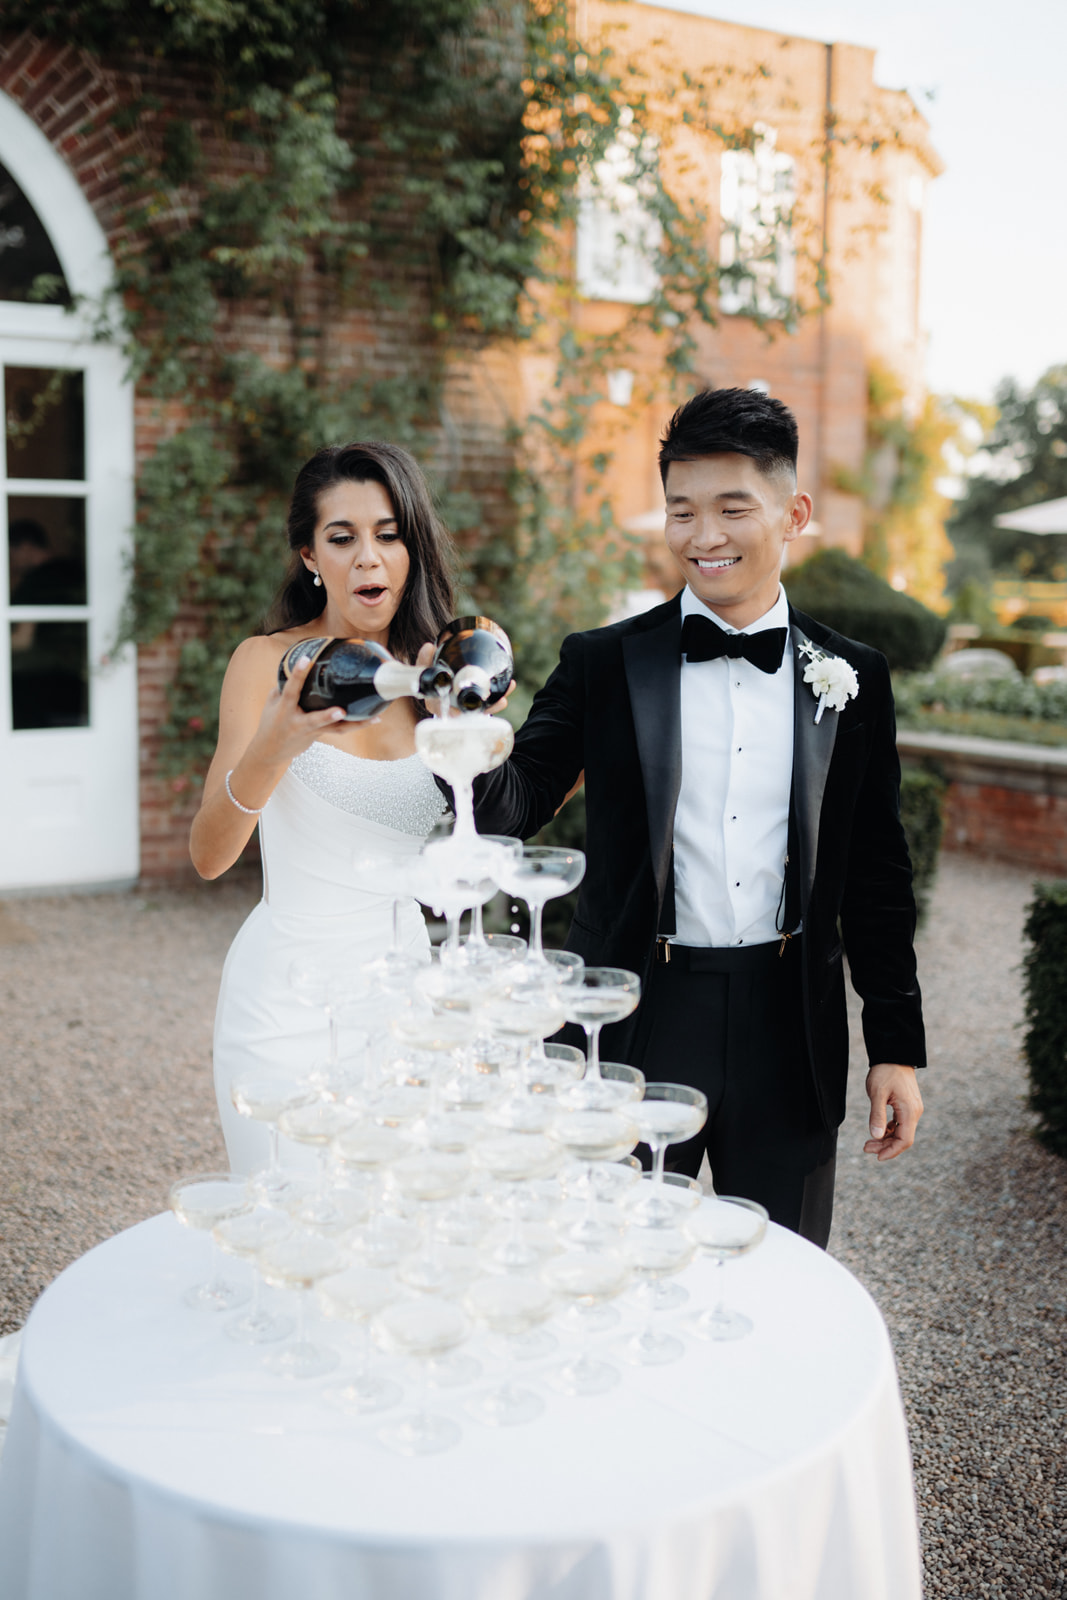 A fusion Greek and Chinese September wedding at Iscoyd Park by Harvey Films